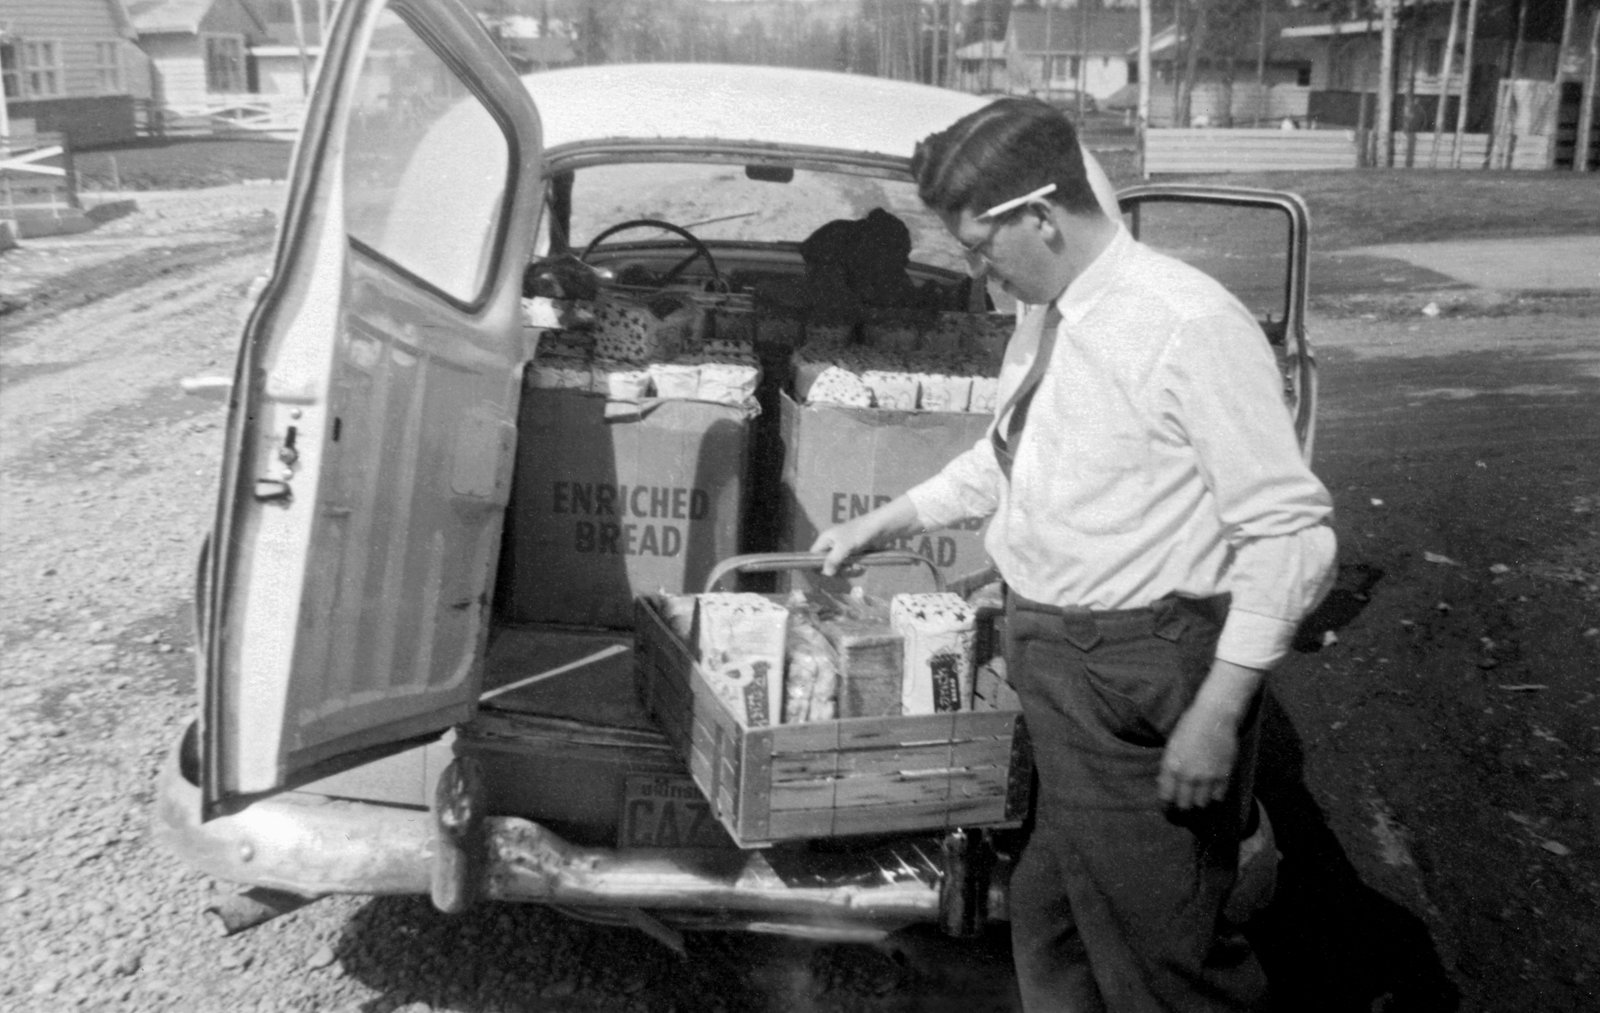 Selling bread at 5¢ a loaf – one of the many jobs that Bill would try when it turned out that the church’s Frontier Apostle program had not actually started yet